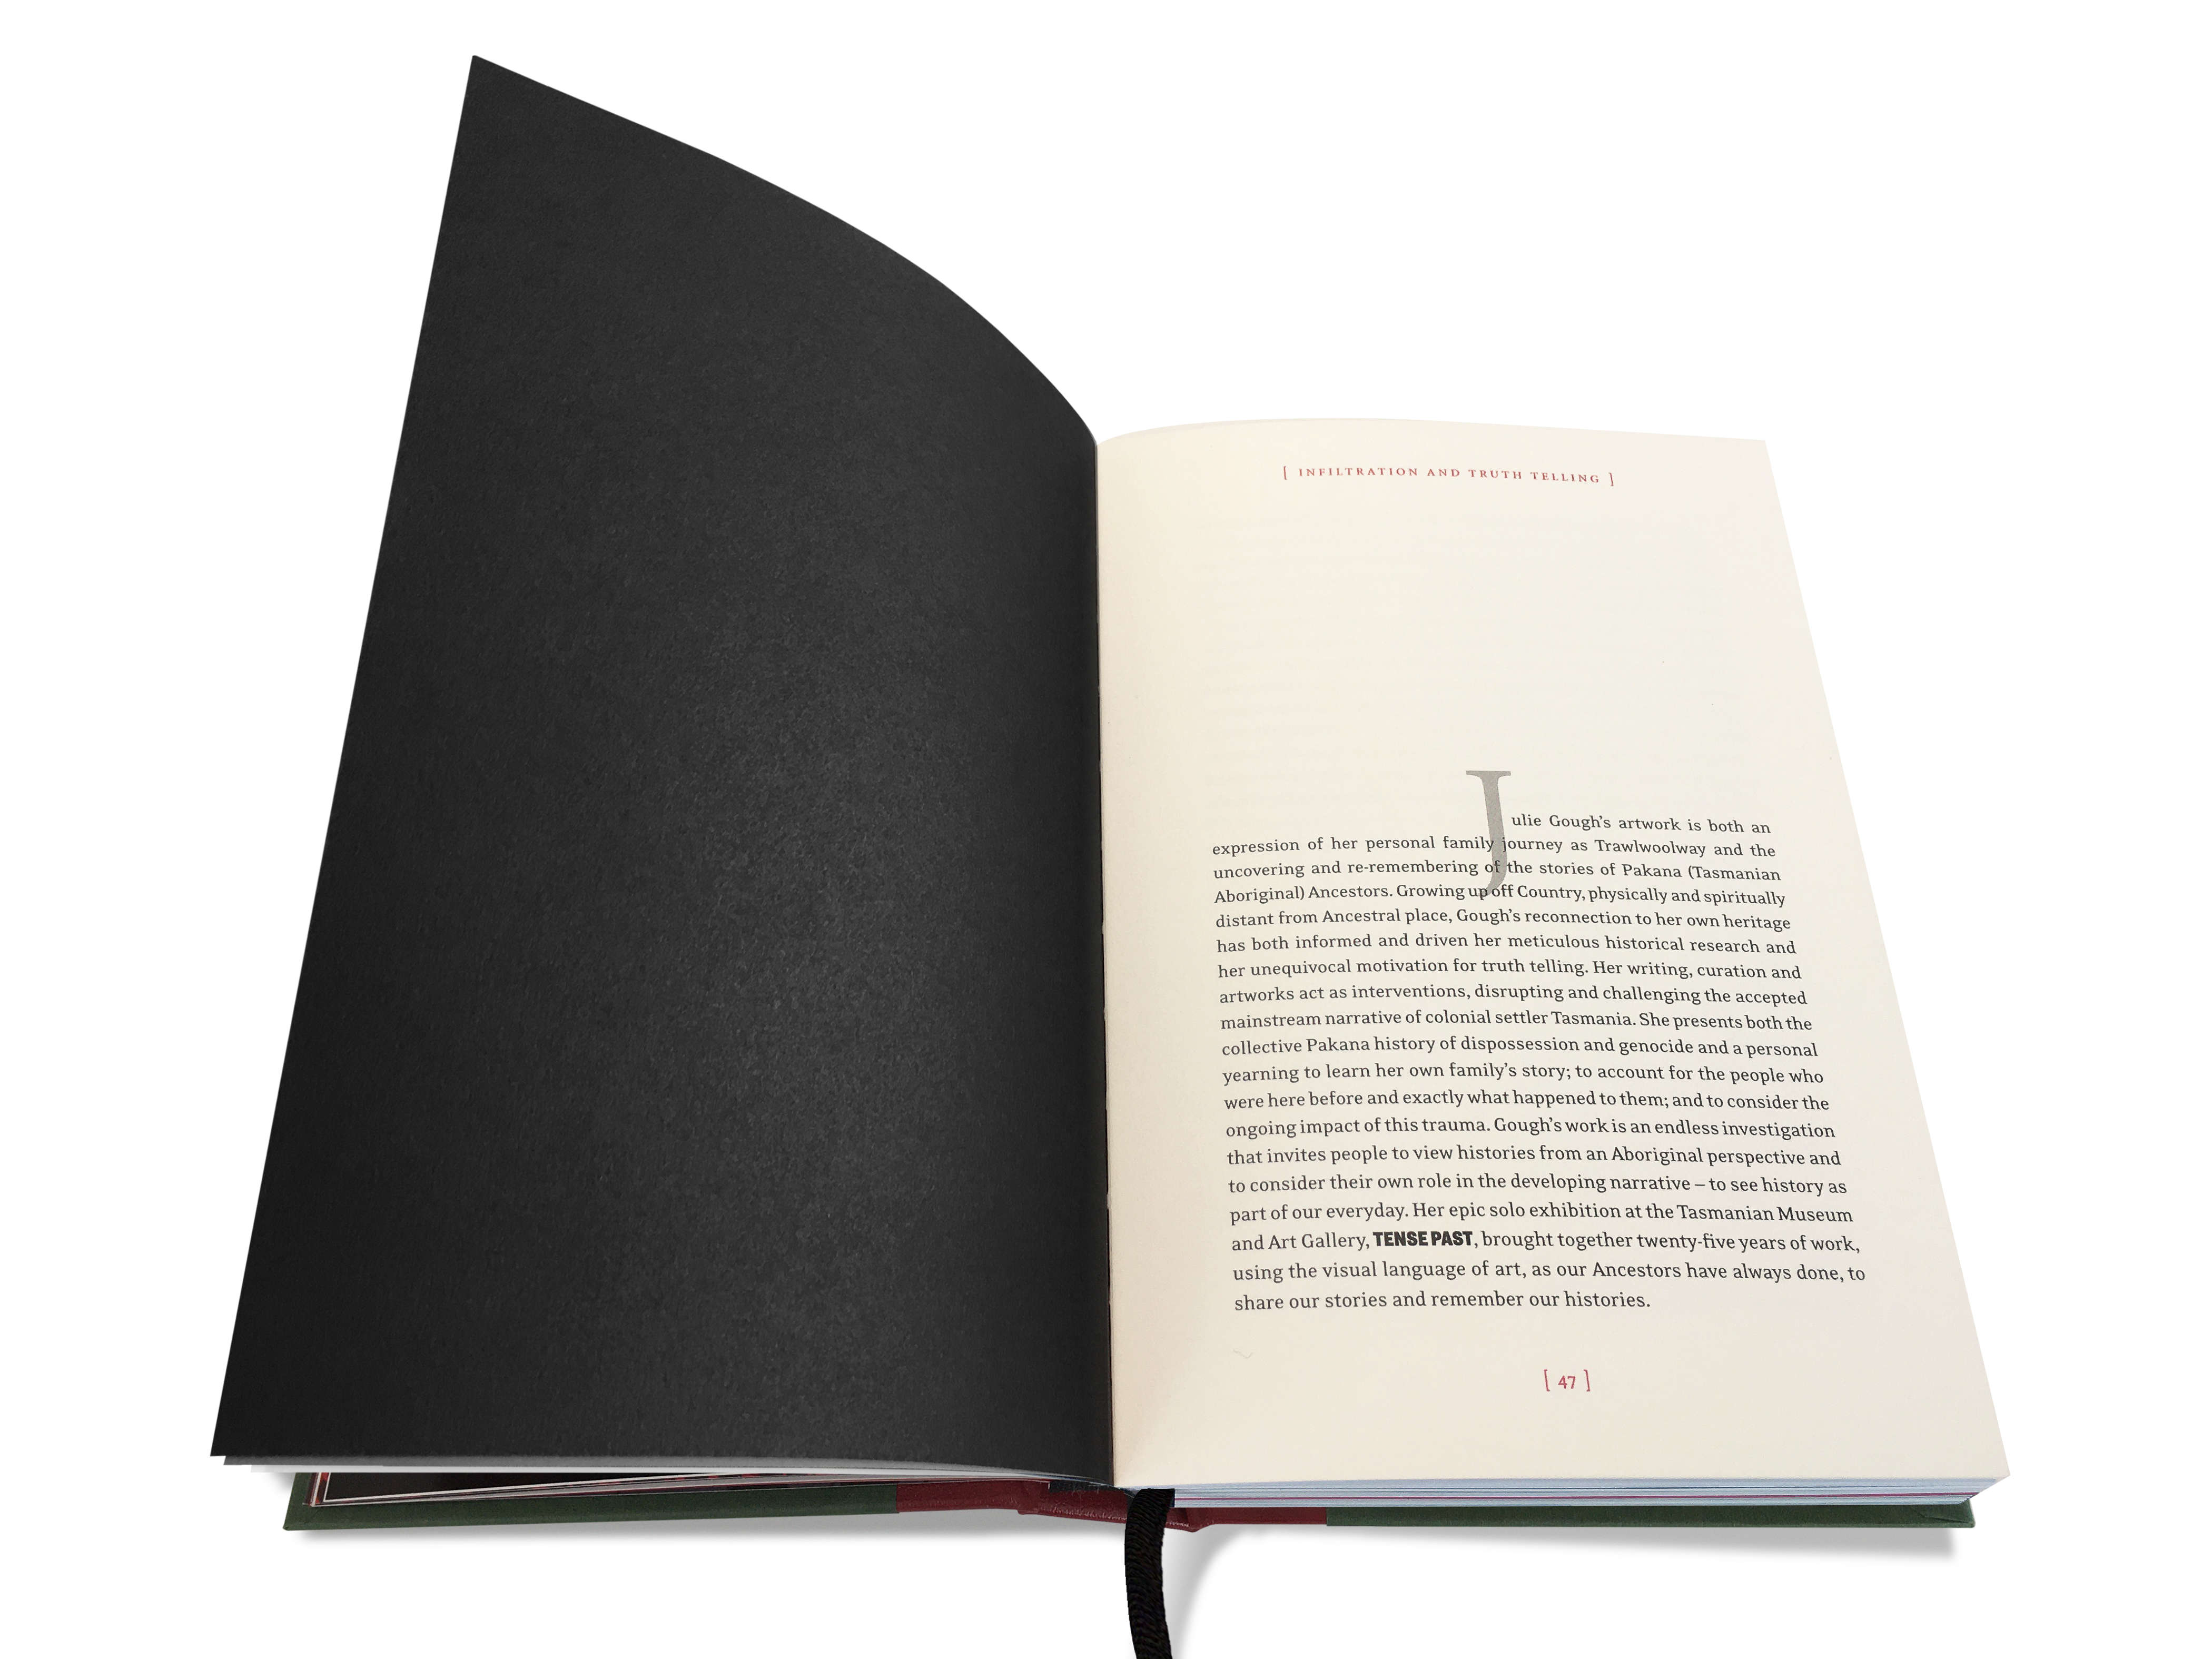 Image of a double-page spread from the TENSE PAST book (pages 118 & 119). The left-hand page is black. The right-hand page is the first page of the essay by Zoe Rimmer titled ‘INFILTRATION AND TRUTH-TELLING’.